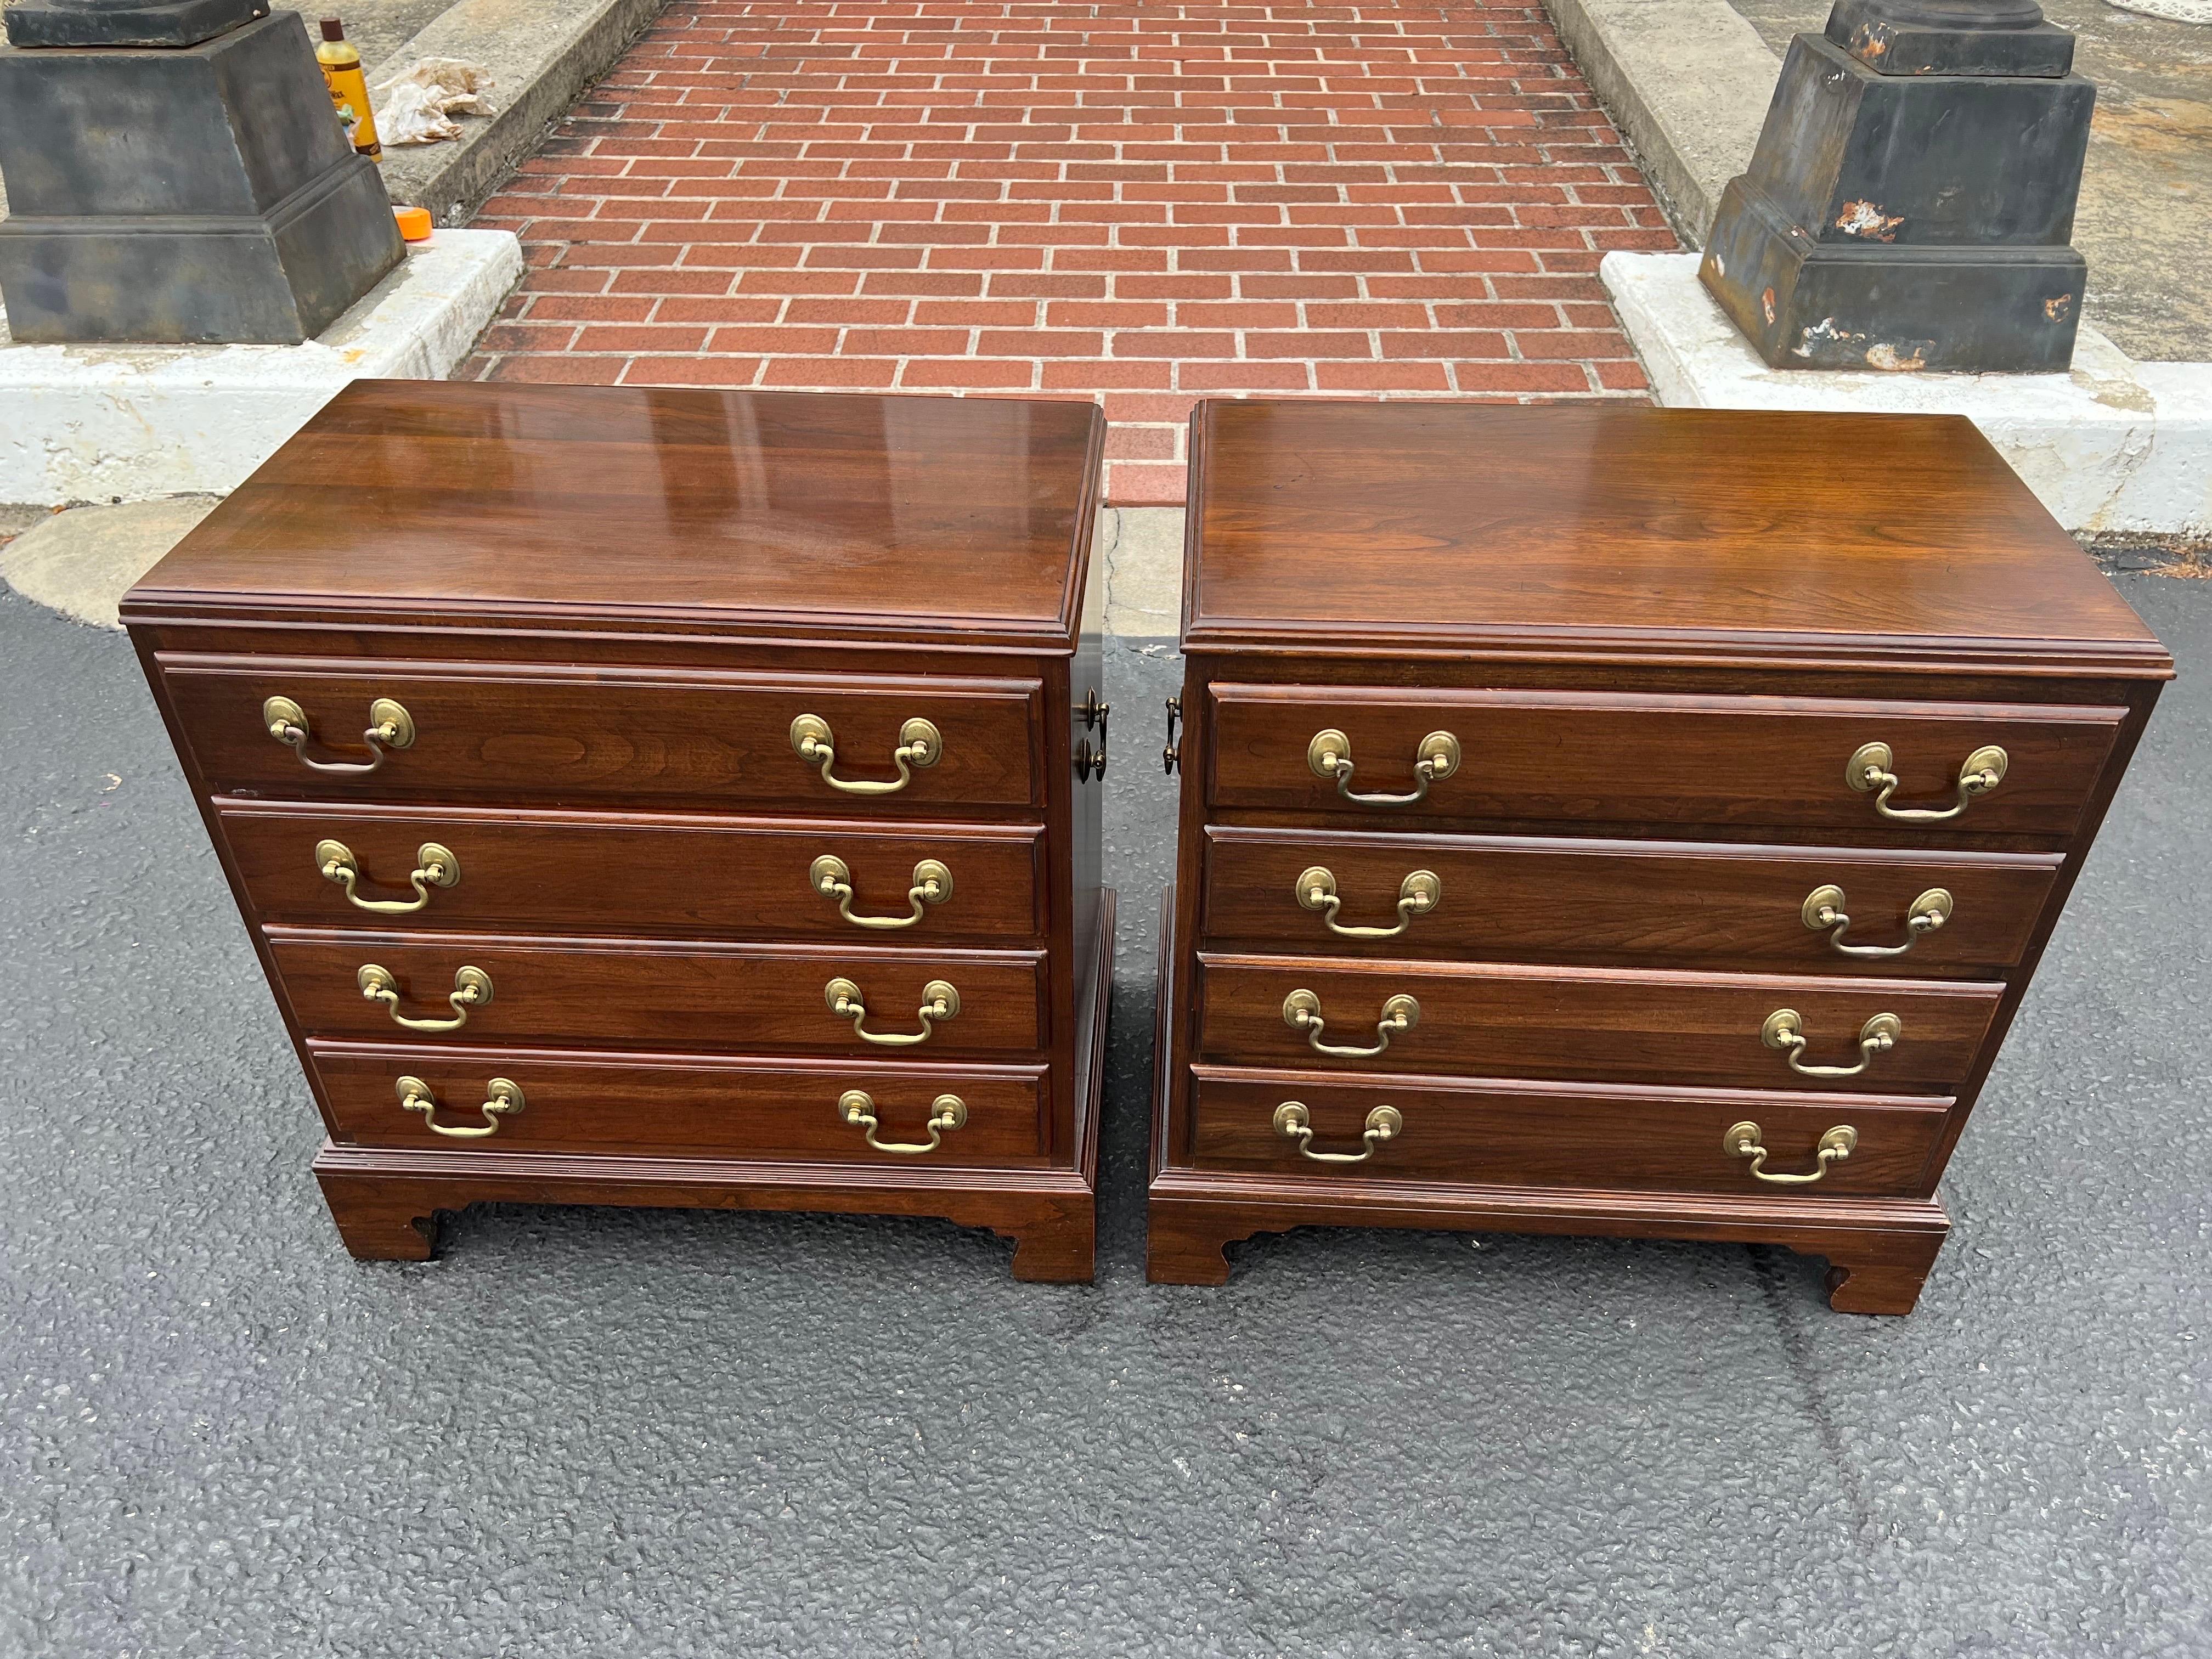 Pair of Ethan Allen Nightstands or End Tables in Mahogany . Classic thin four drawers with solid brass pulls. Timeless style and design. Please ignore the white glove quote . The 1stdibs white glove quote can be ignored as these can parcel ship for